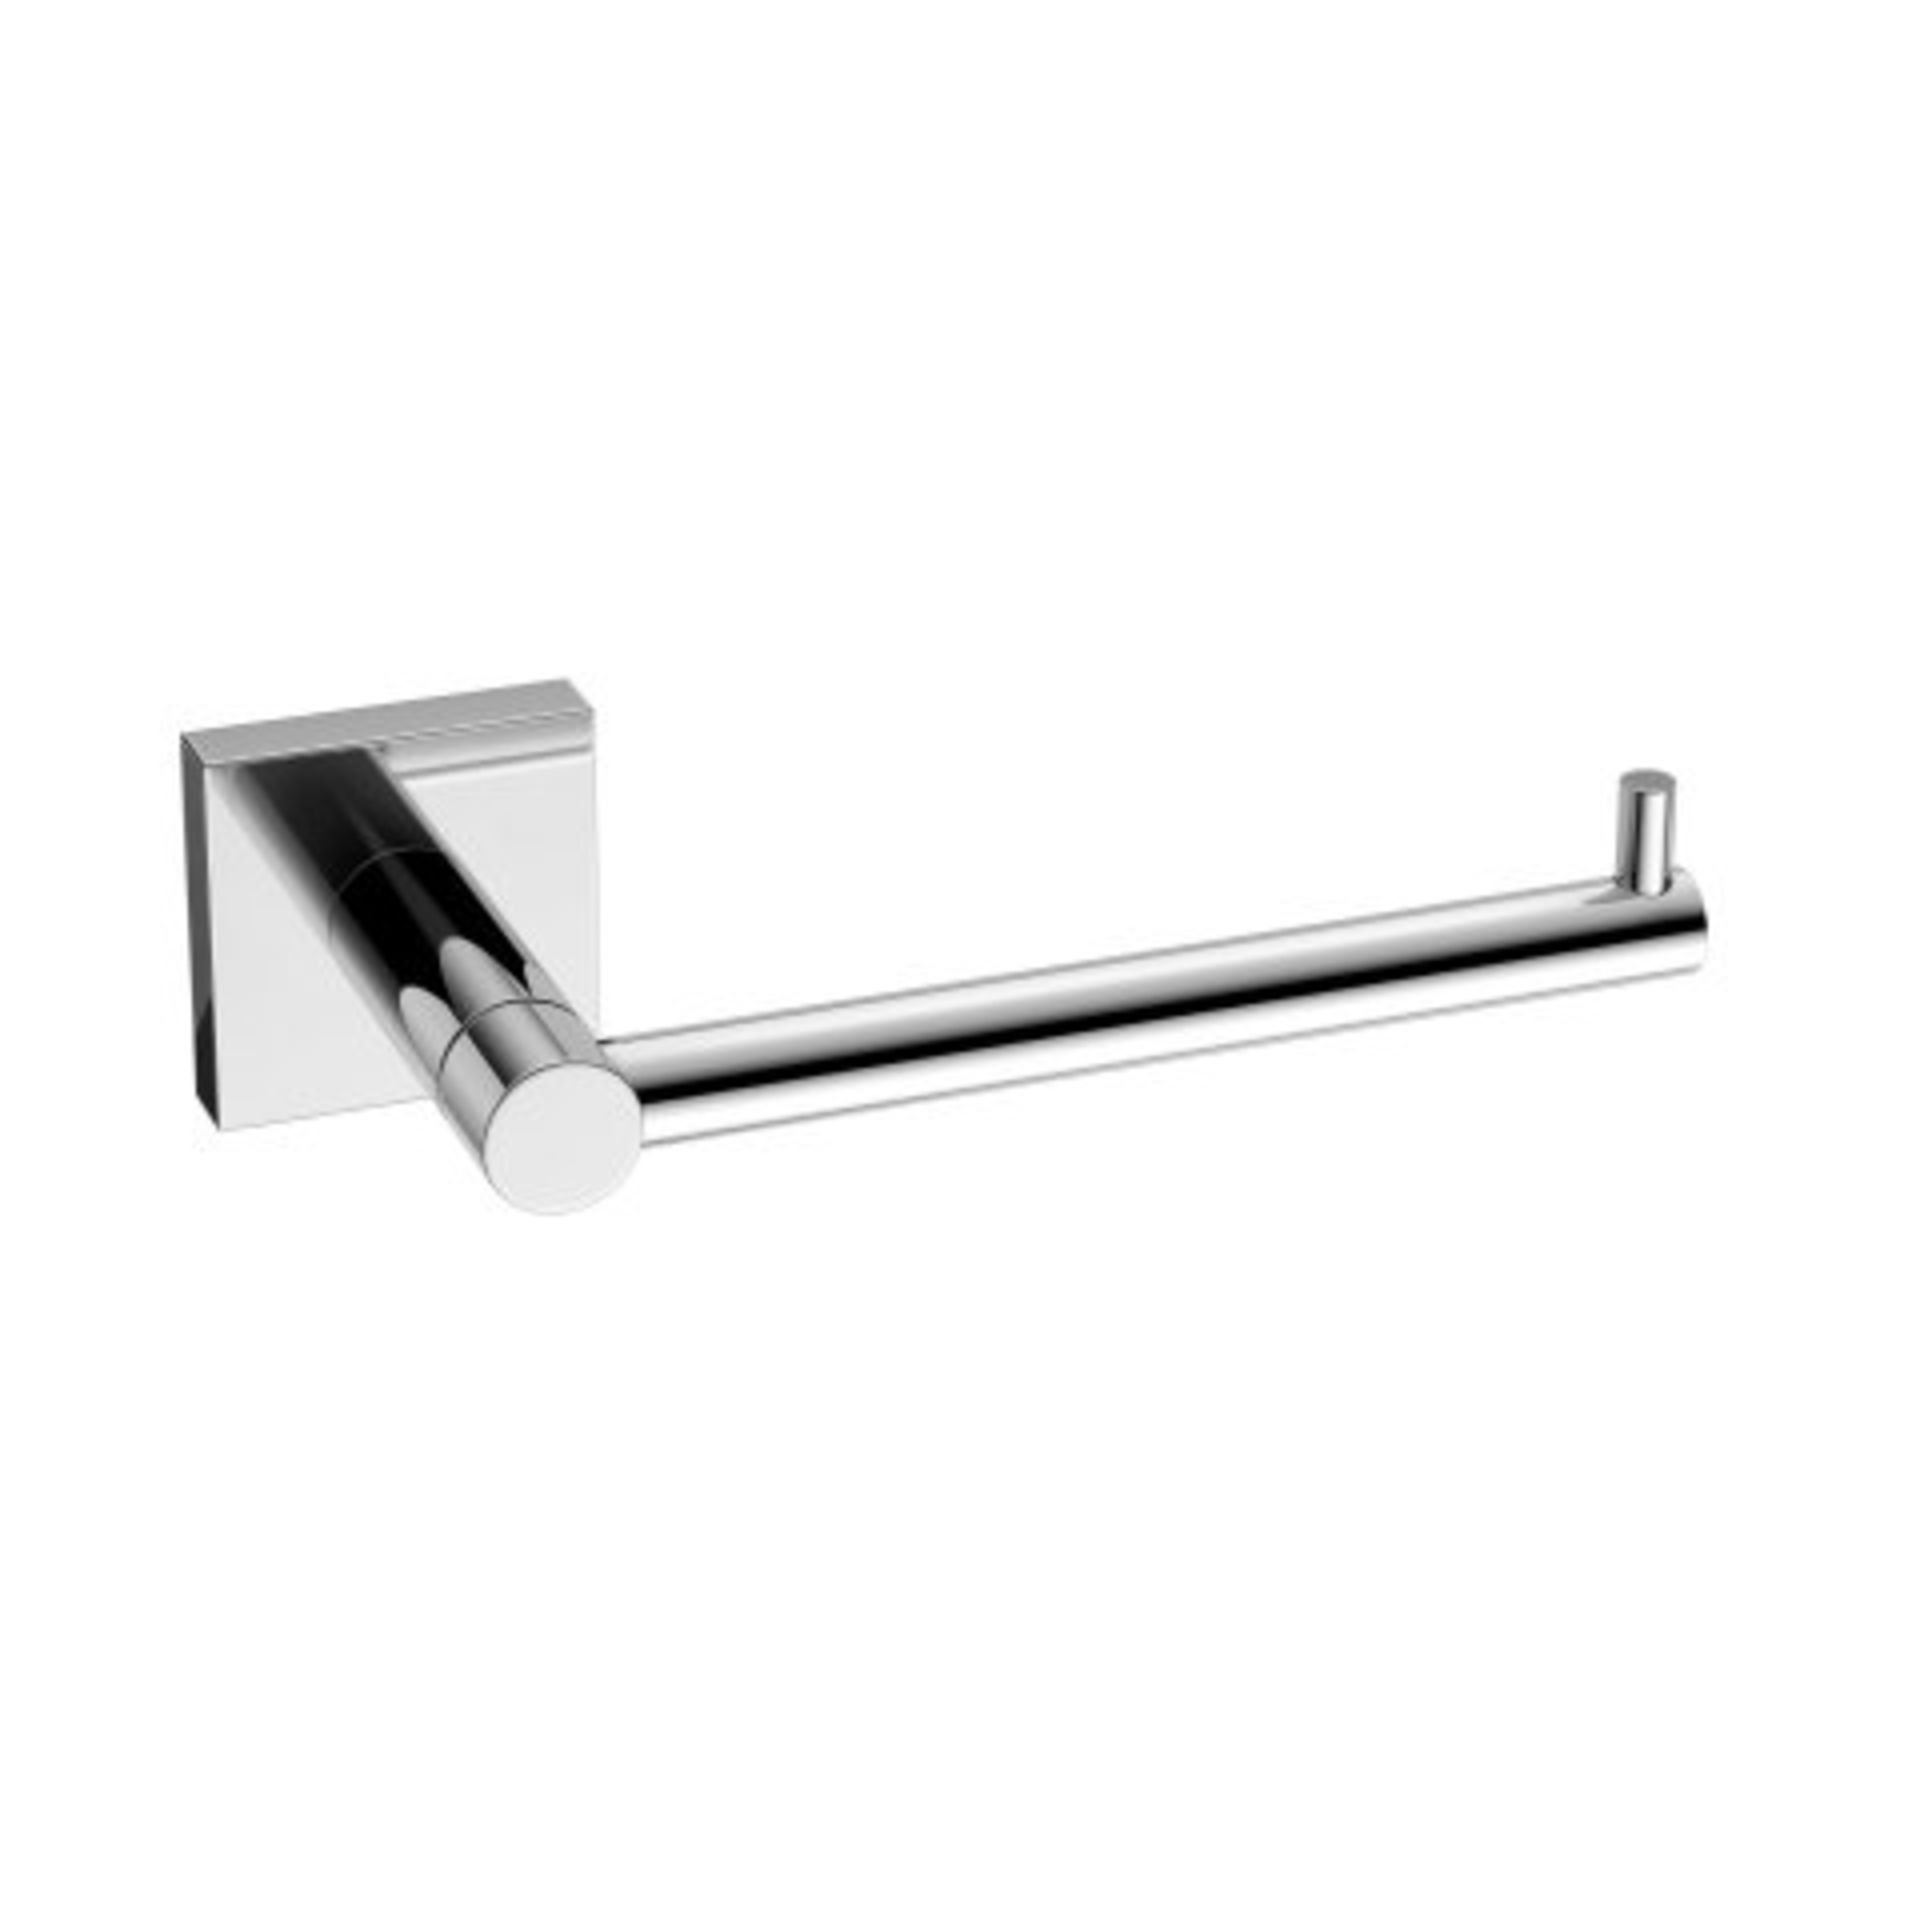 (M99) Holbeck Toilet Roll Holder Made with long lasting corrosion resistant materials this is an - Image 3 of 3